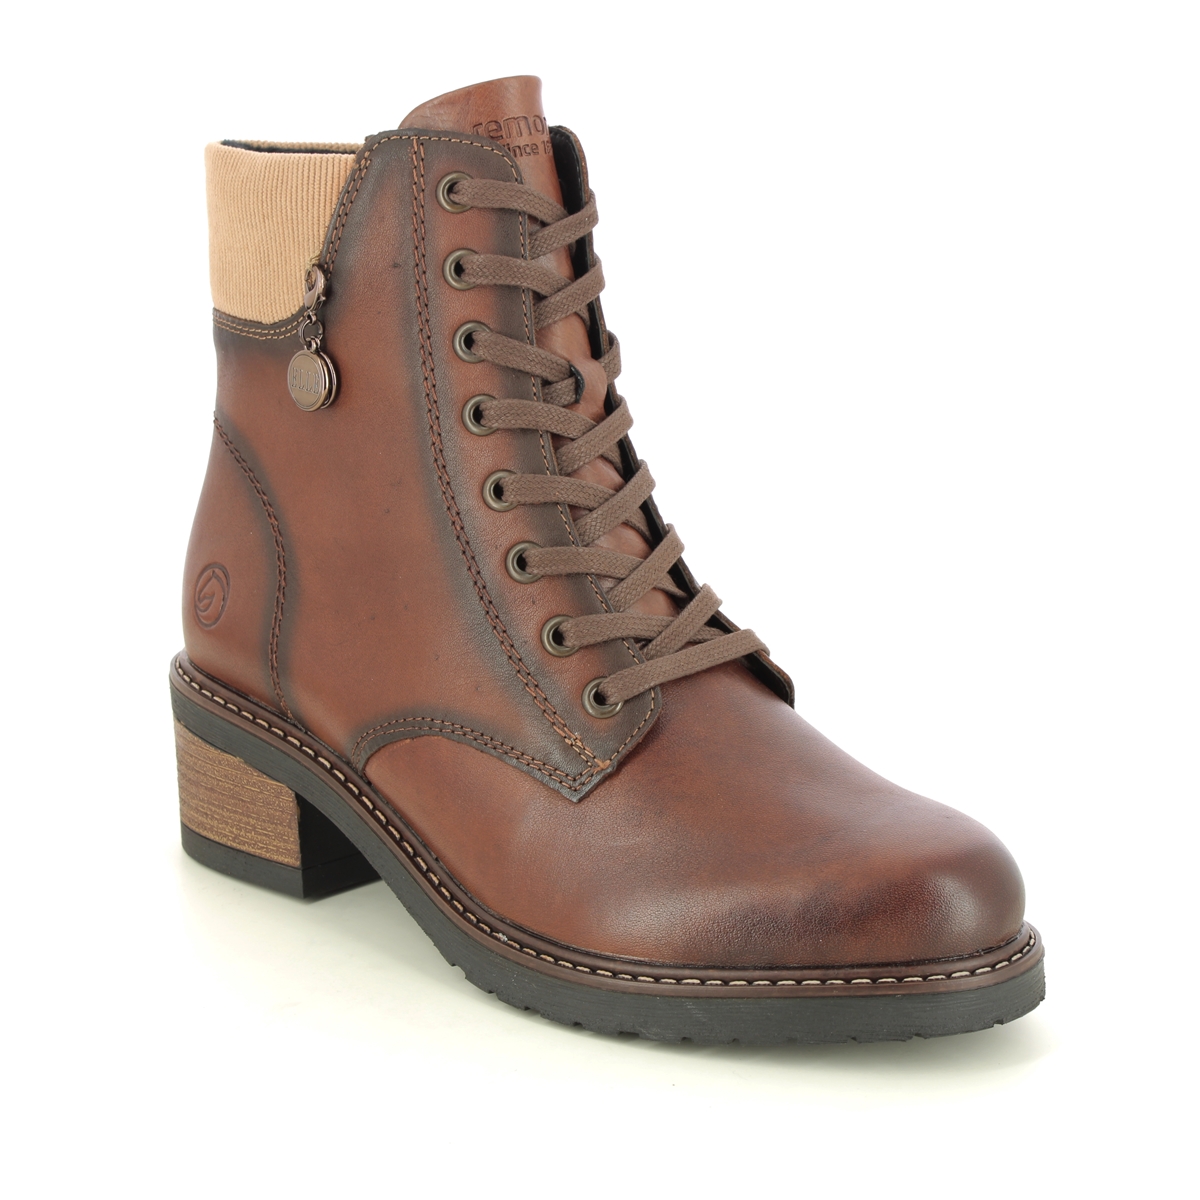 Remonte Menarem Elle Brown Leather Womens Lace Up Boots D1A70-22 In Size 36 In Plain Brown Leather